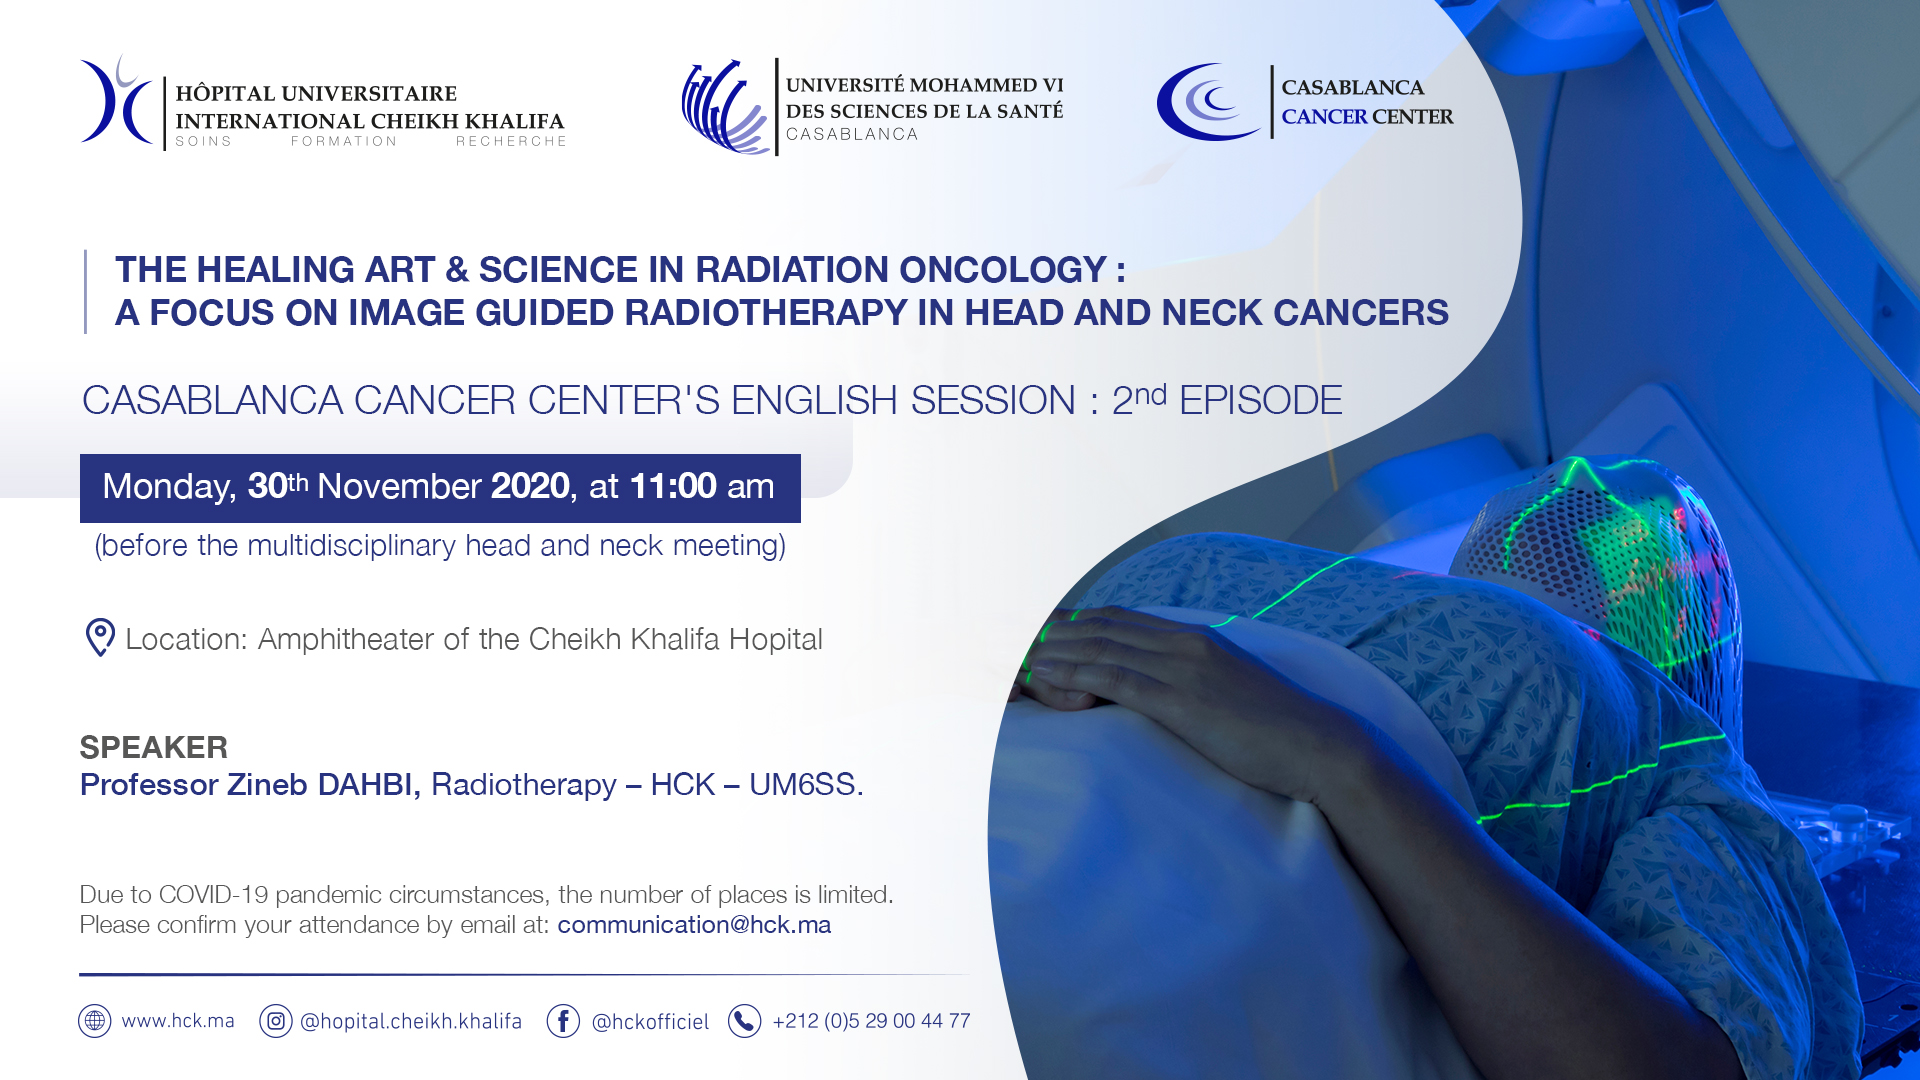 CASABLANCA CANCER CENTER'S ENGLISH SESSION - THE HEALING ART & SCIENCE IN RADIATION ONCOLOGY: A FOCUS ON IMAGE GUIDED RADIOTHERAPY IN HEAD AND NECK CANCERS 